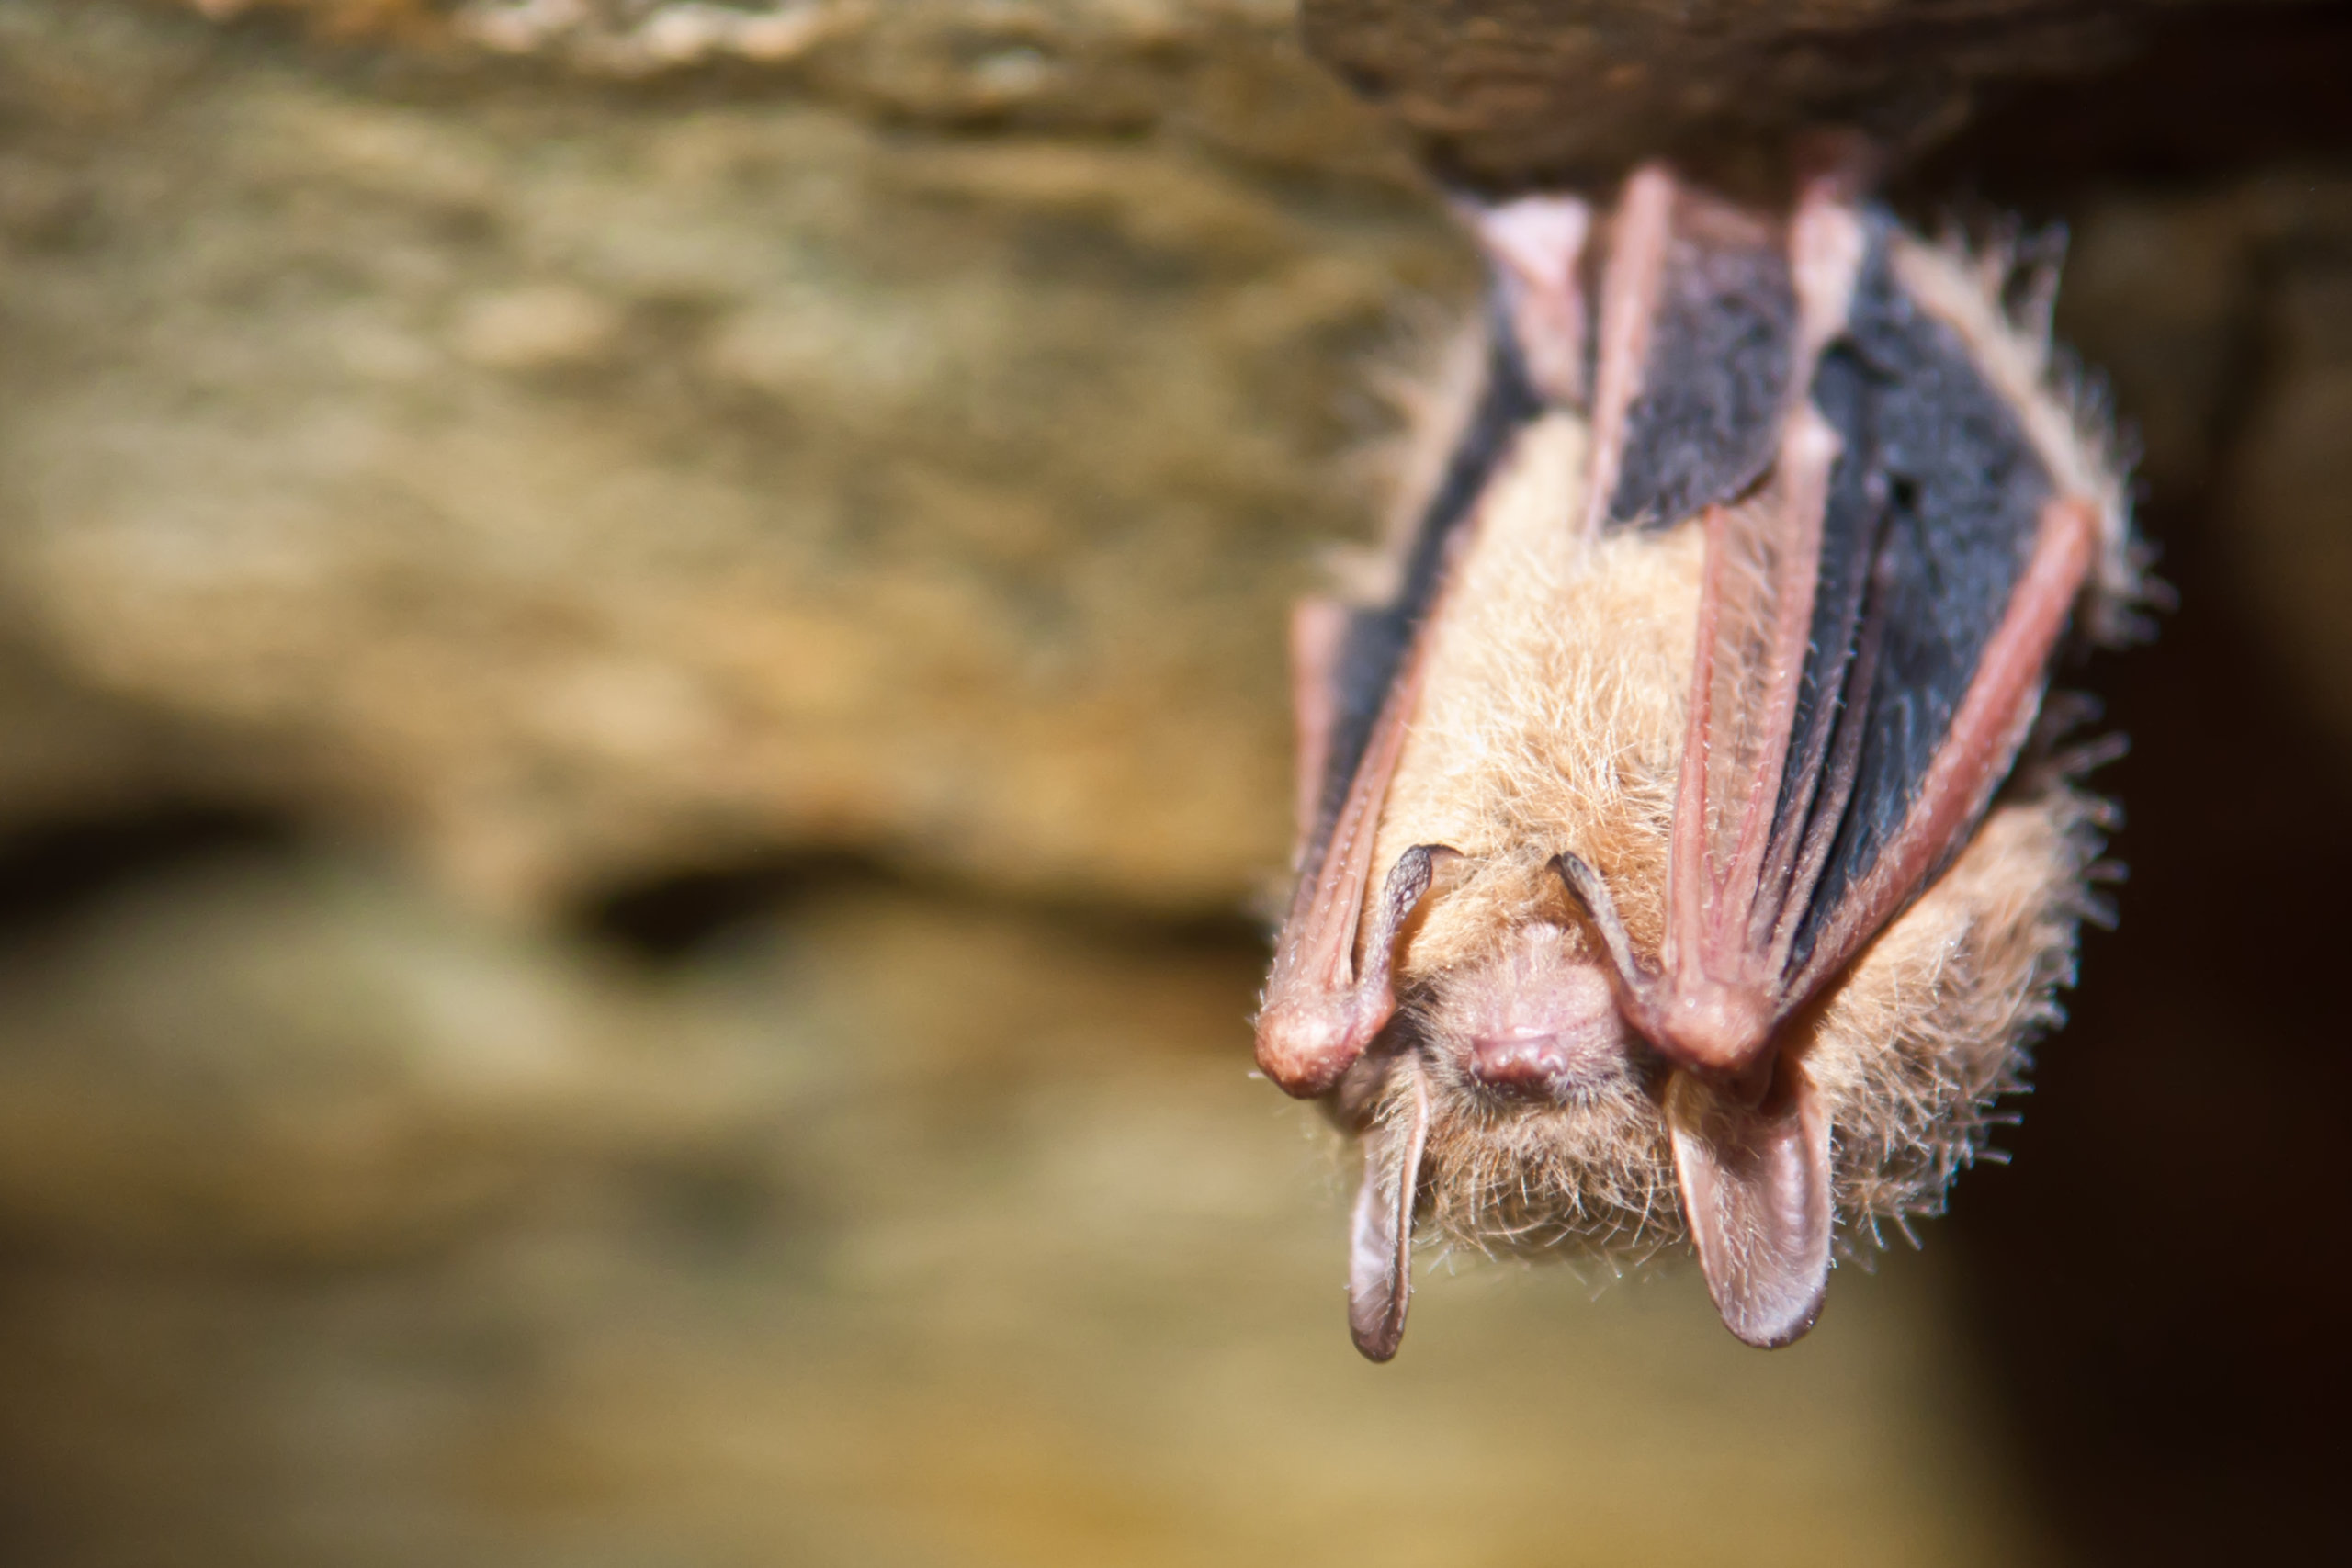 Fungus that causes white-nose syndrome is found on bats in New Mexico caves